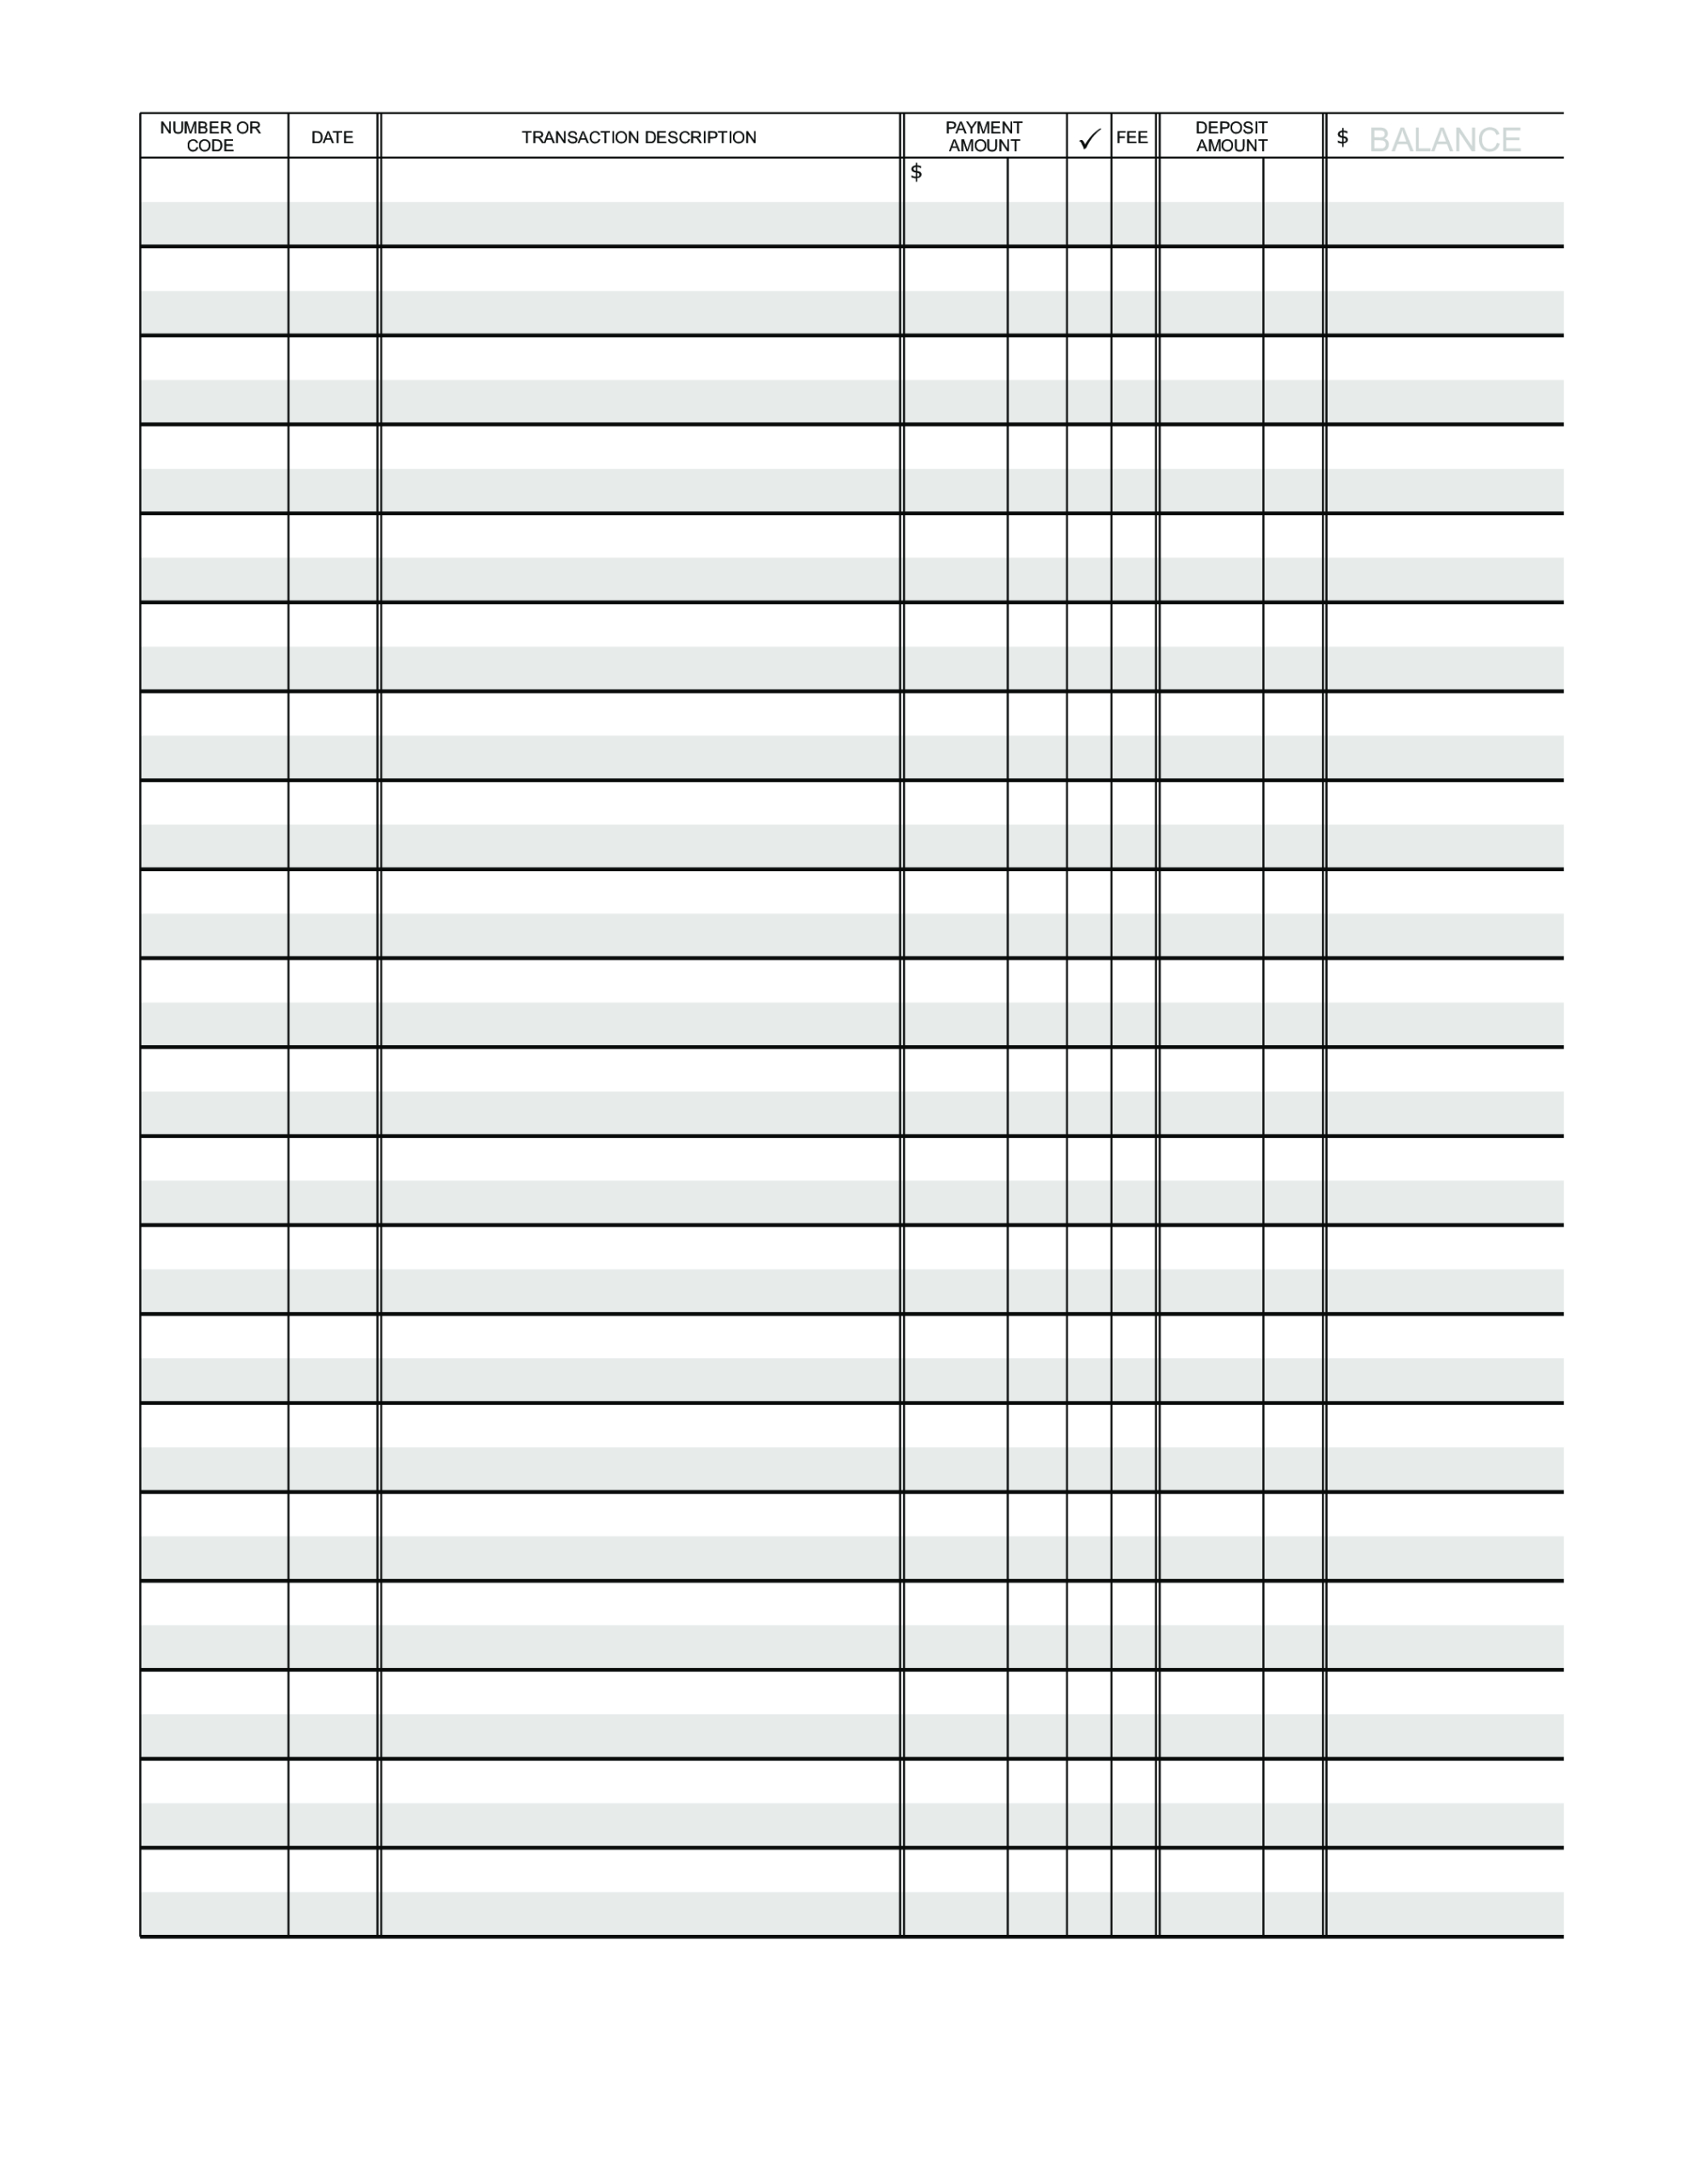 Blank Ledger Paper | Templates At Allbusinesstemplates Regarding Blank Ledger Template